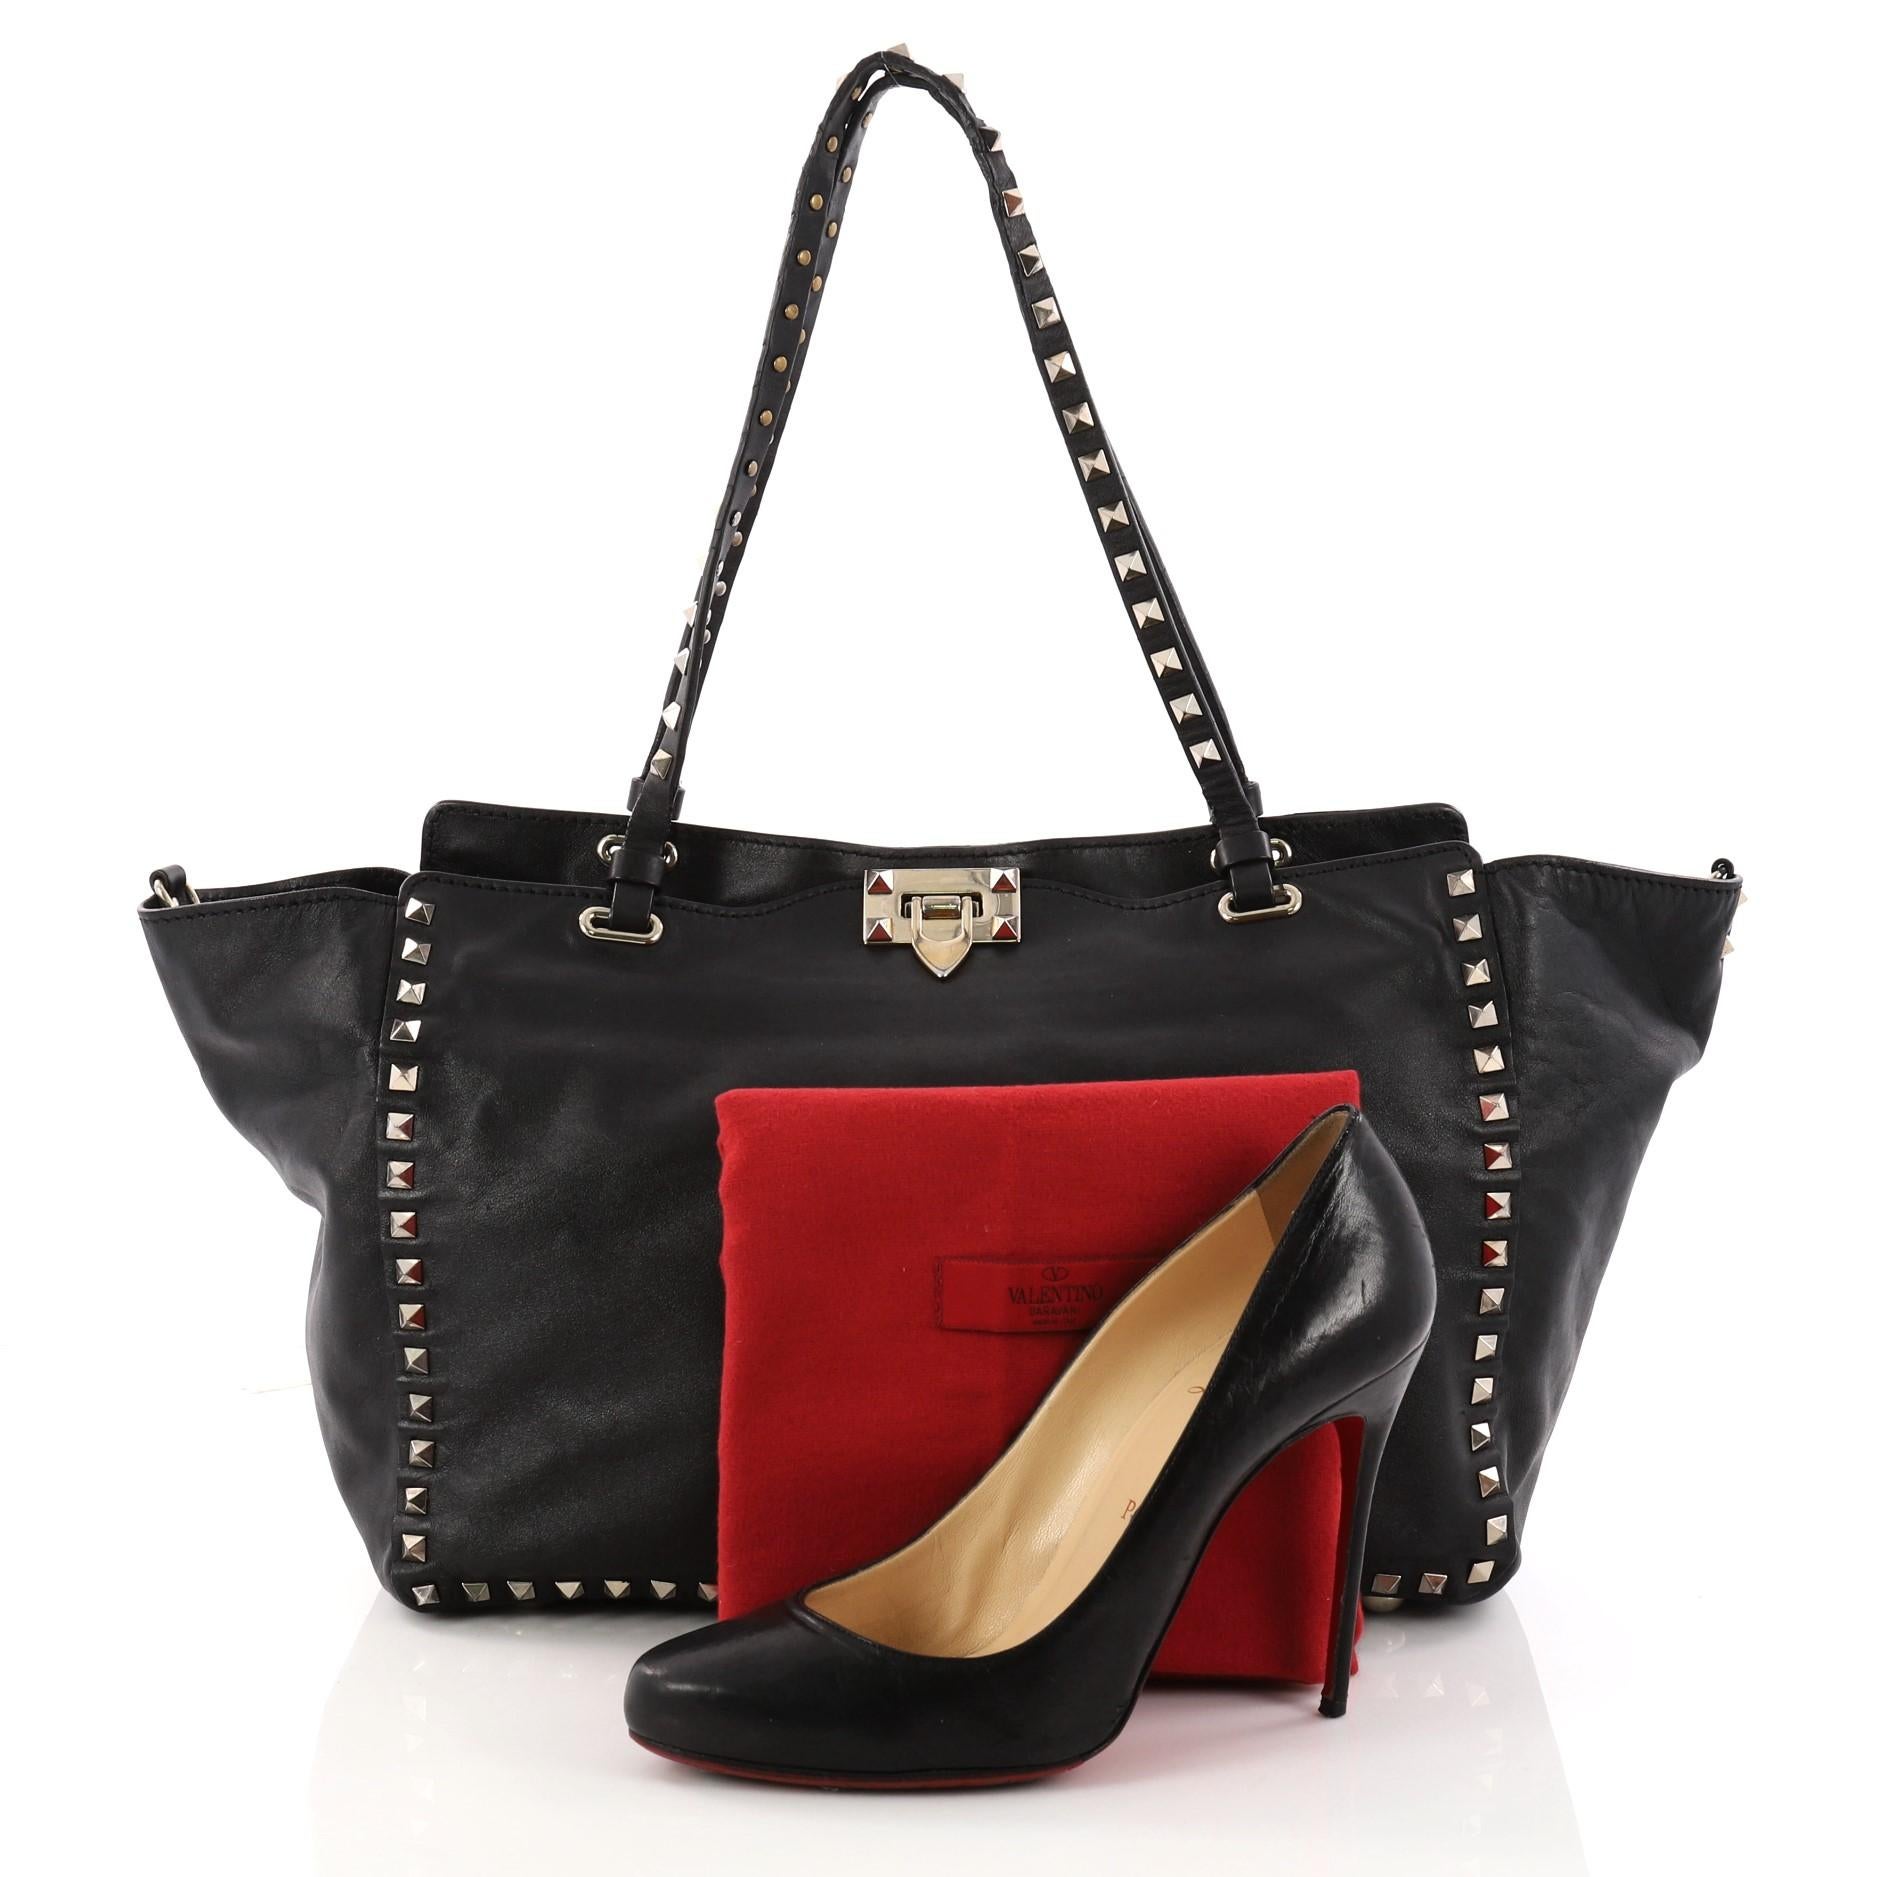 This authentic Valentino Rockstud Tote Soft Leather Medium mixes edgy style with luxurious detailing. Crafted from black soft leather, this stylish tote features dual tall flat handles, gold-tone pyramid stud trim details, signature clasp lock,